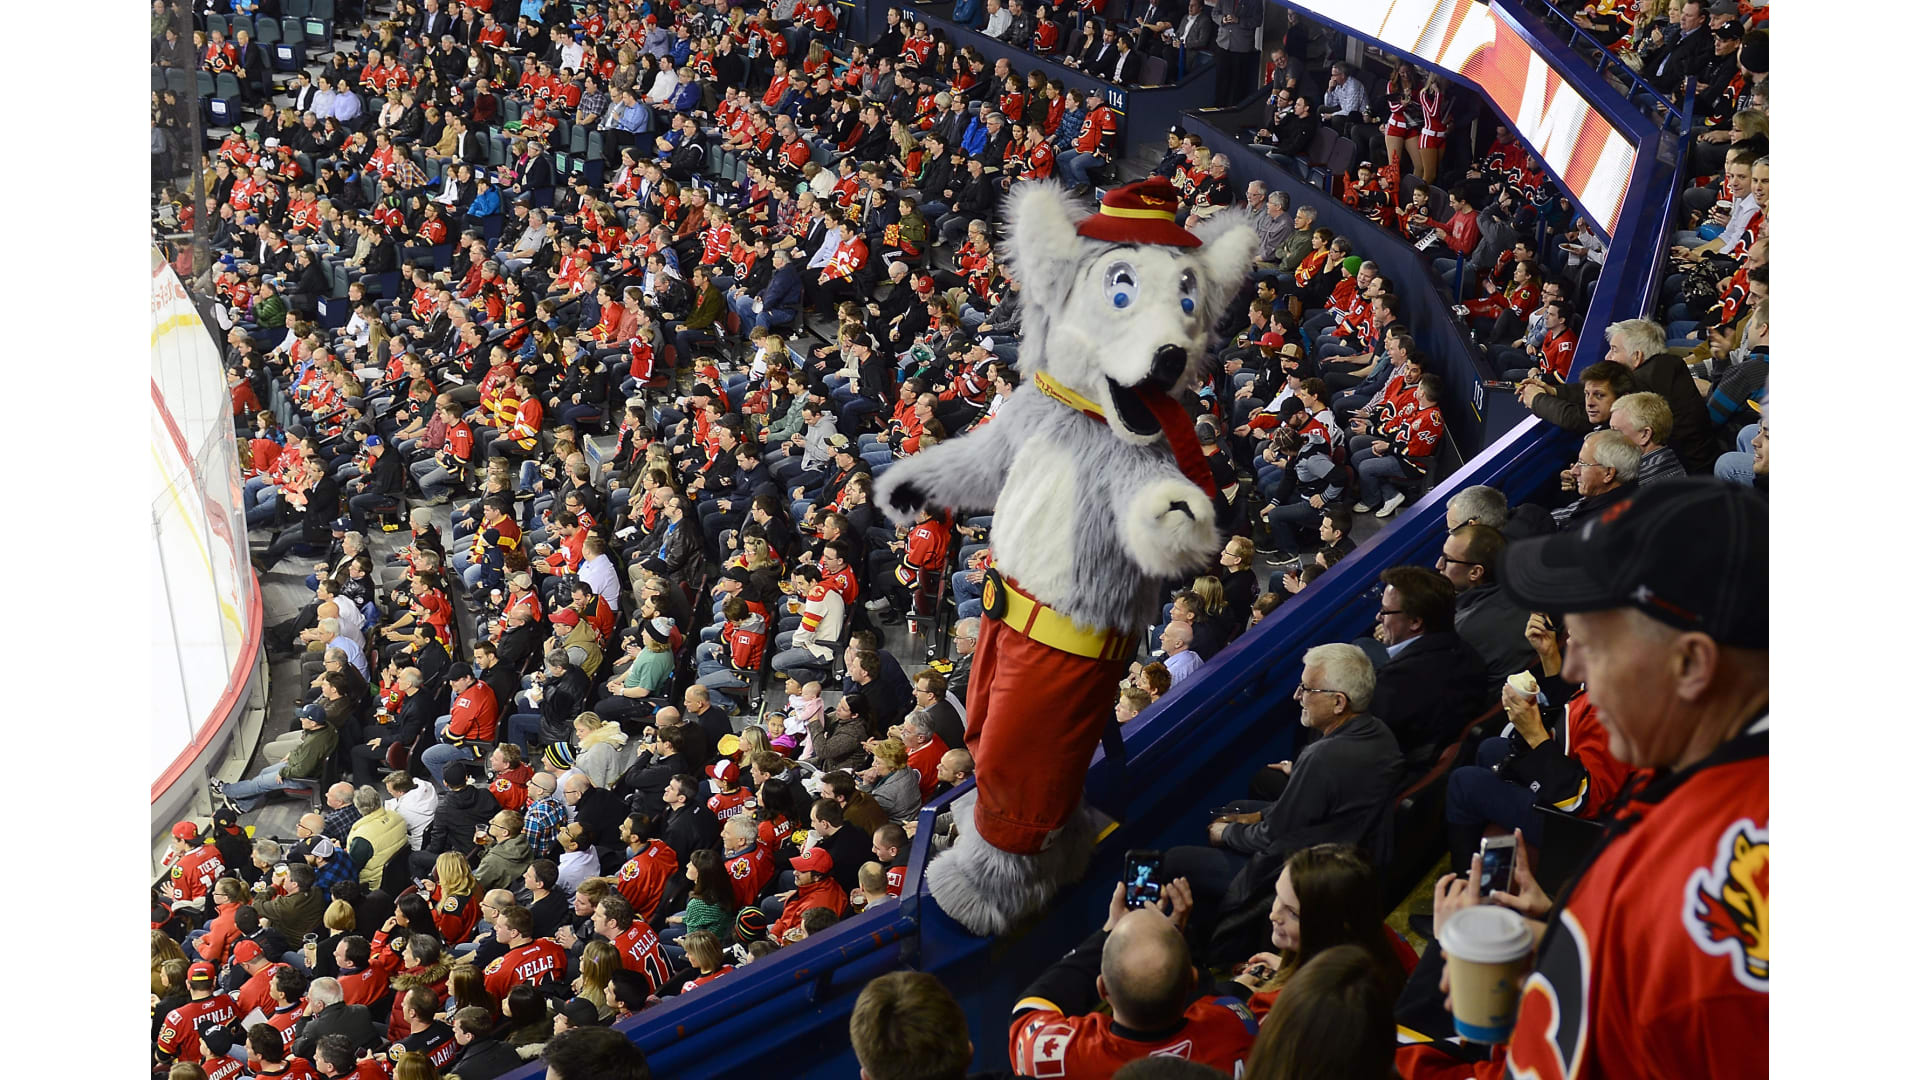 Calgary Flames' Harvey the Hound is the worst mascot in the NHL, fans say